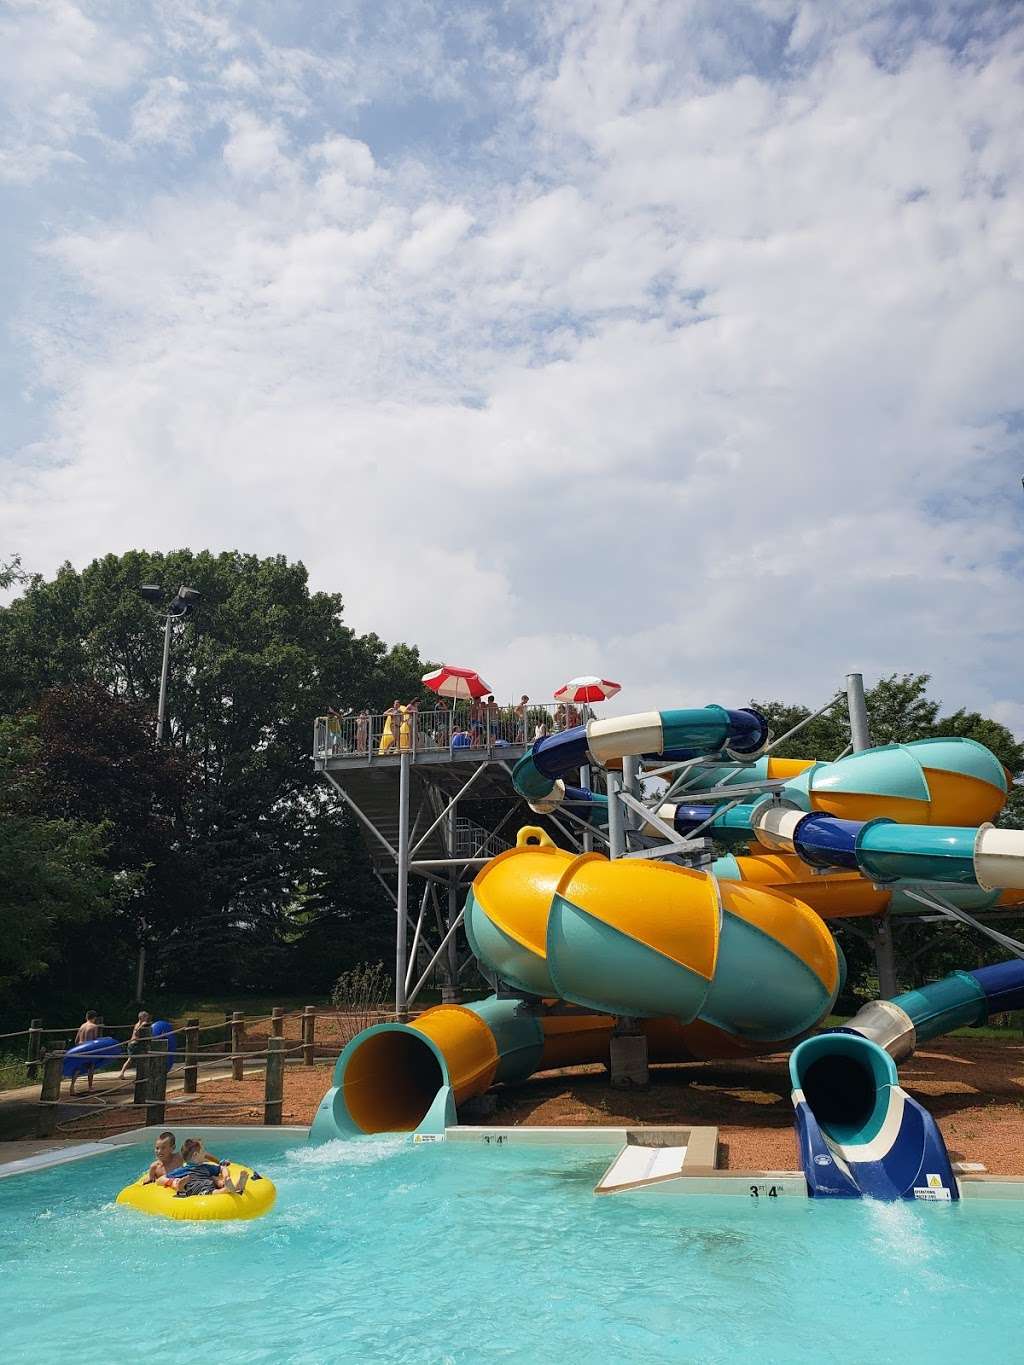 Cool Waters Aquatic Park | 2028 S 124th St, West Allis, WI 53227 | Phone: (414) 257-8098